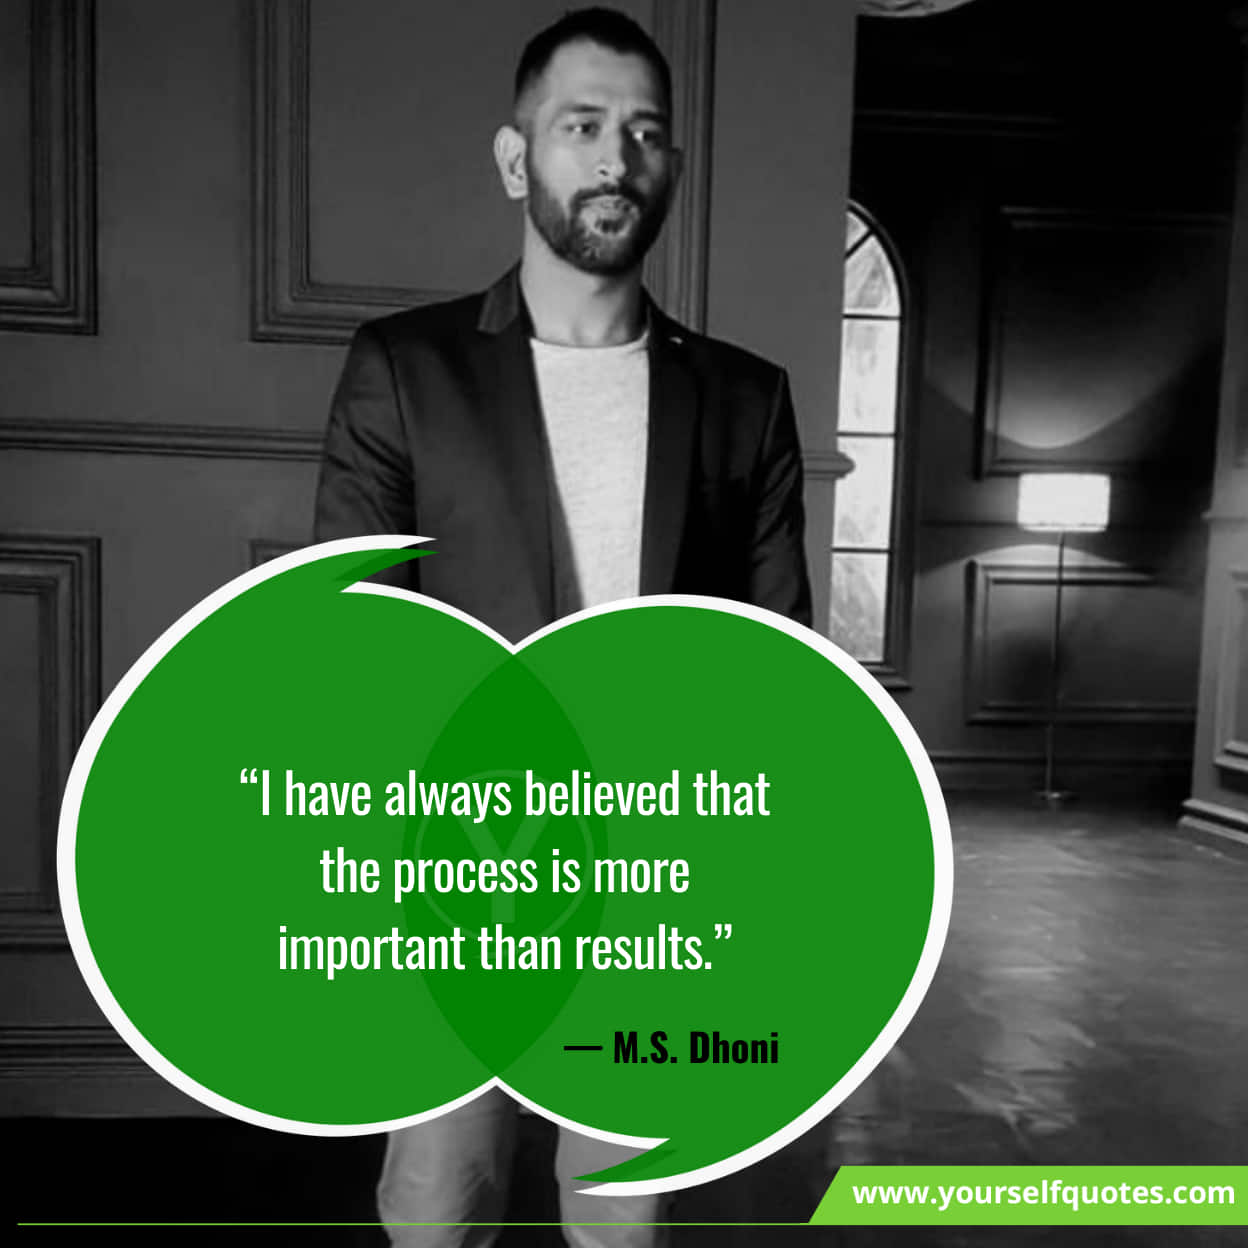 MS Dhoni Quotes For Success